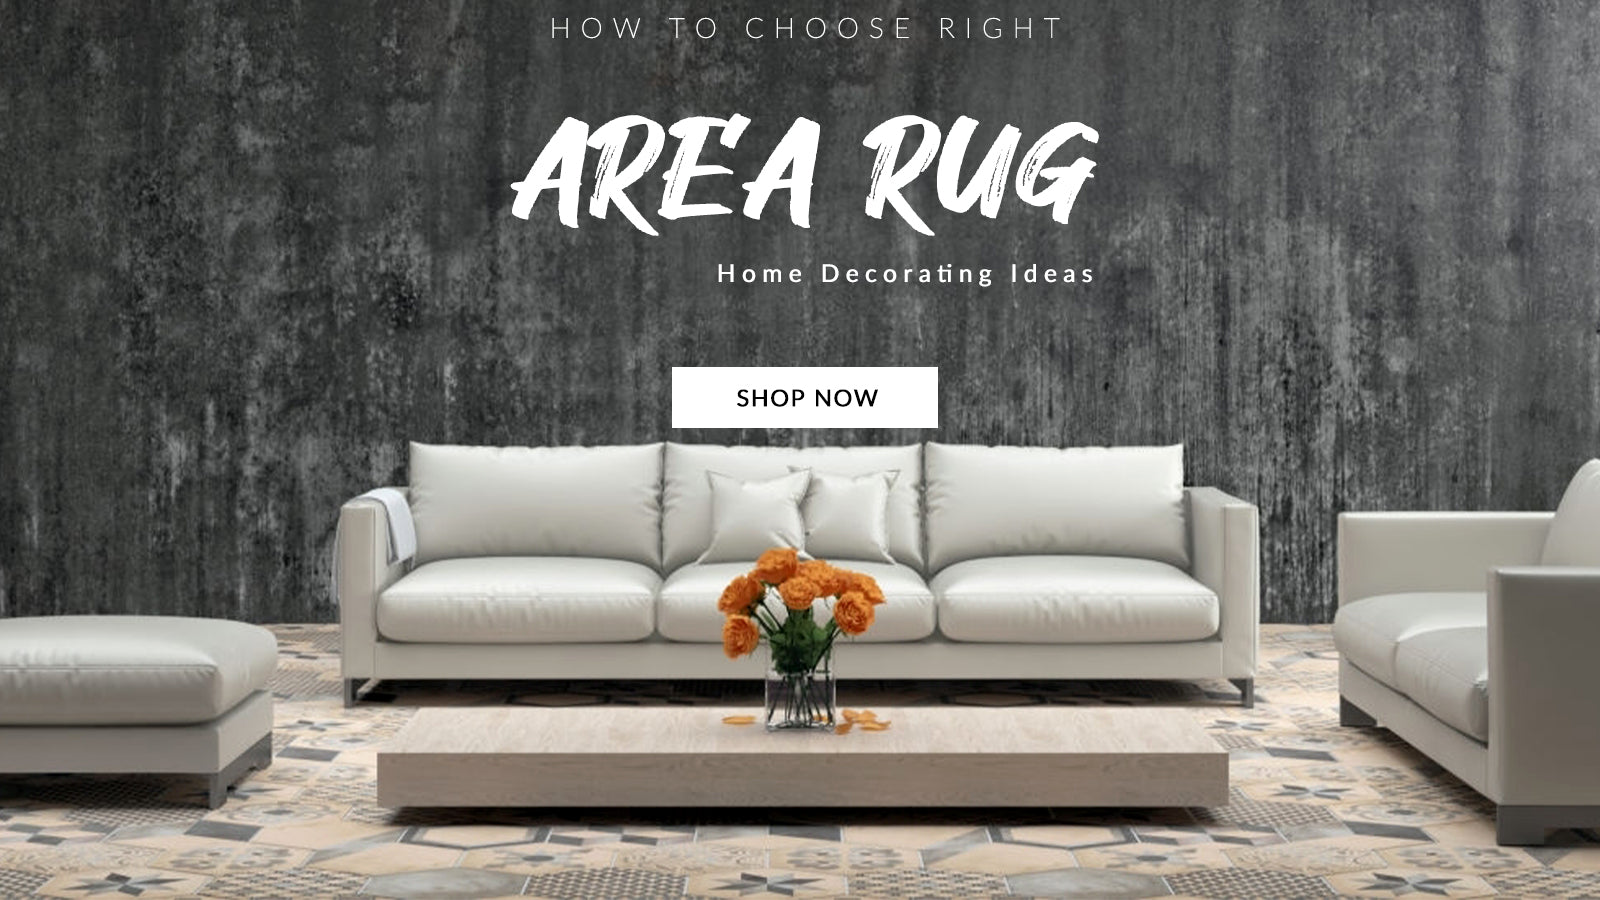 How to Choose the Right Area Rug